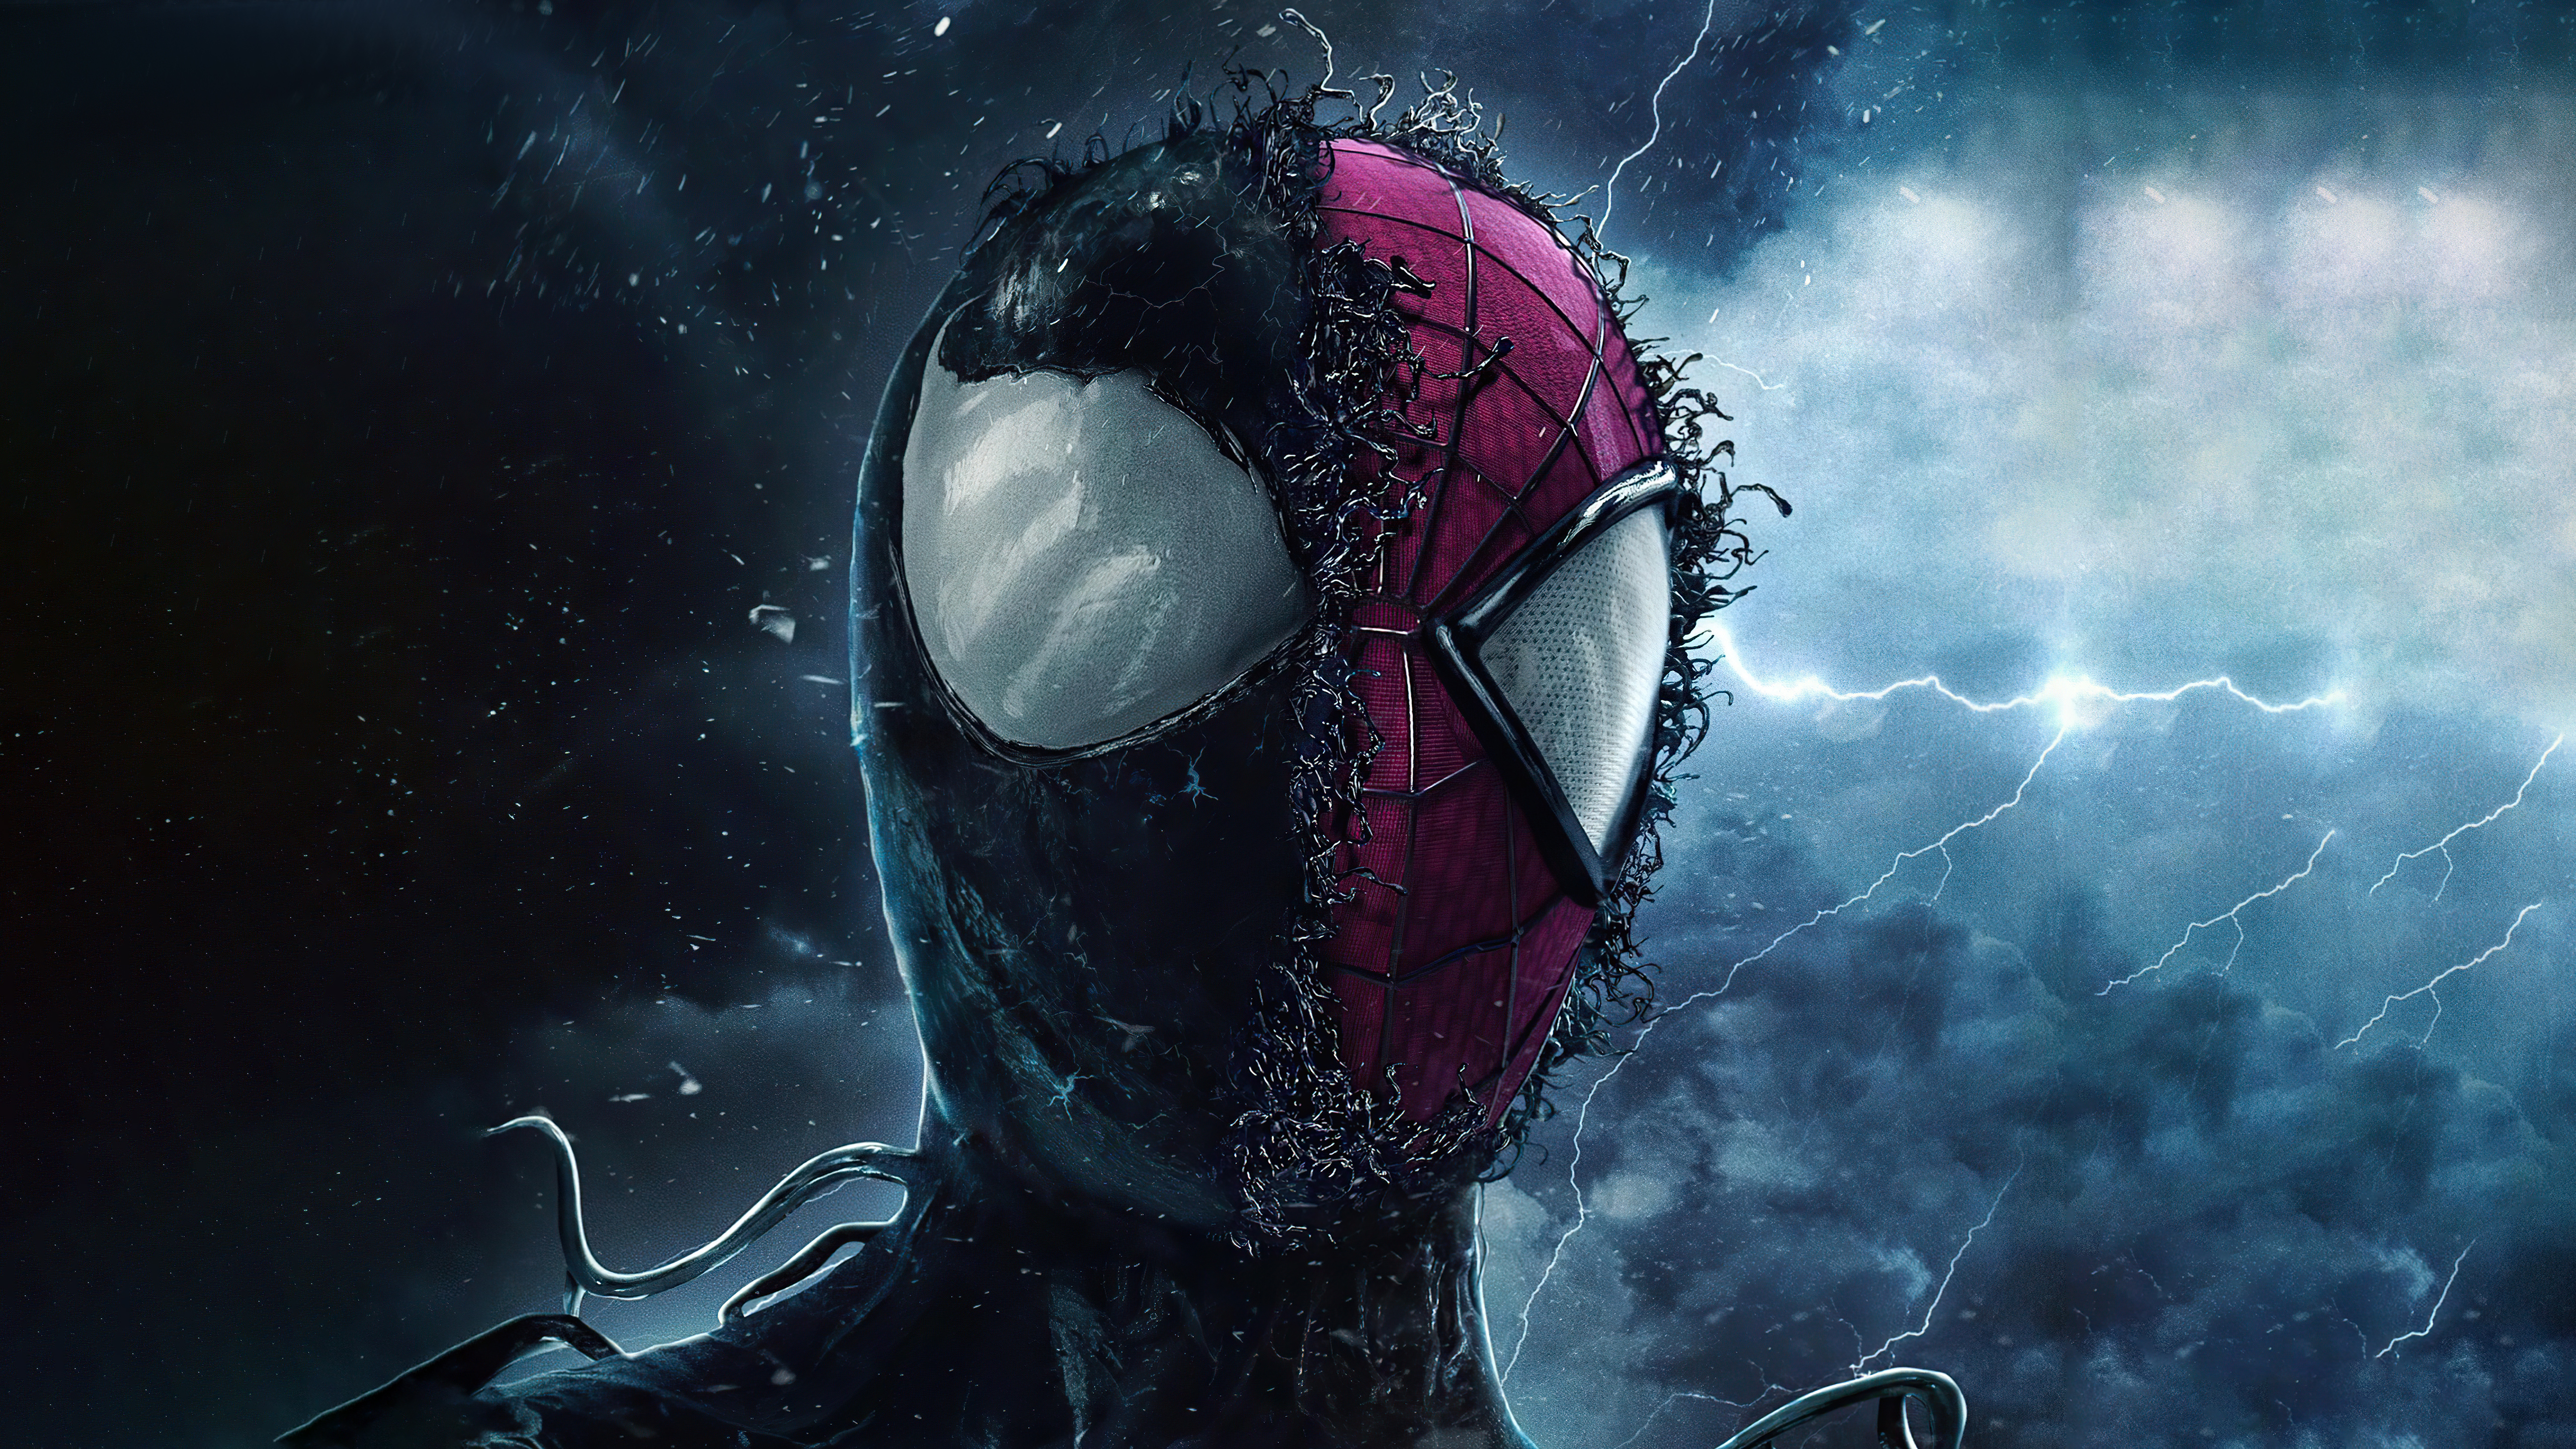 The amazing spiderman k hd superheroes k wallpapers images backgrounds photos and pictures